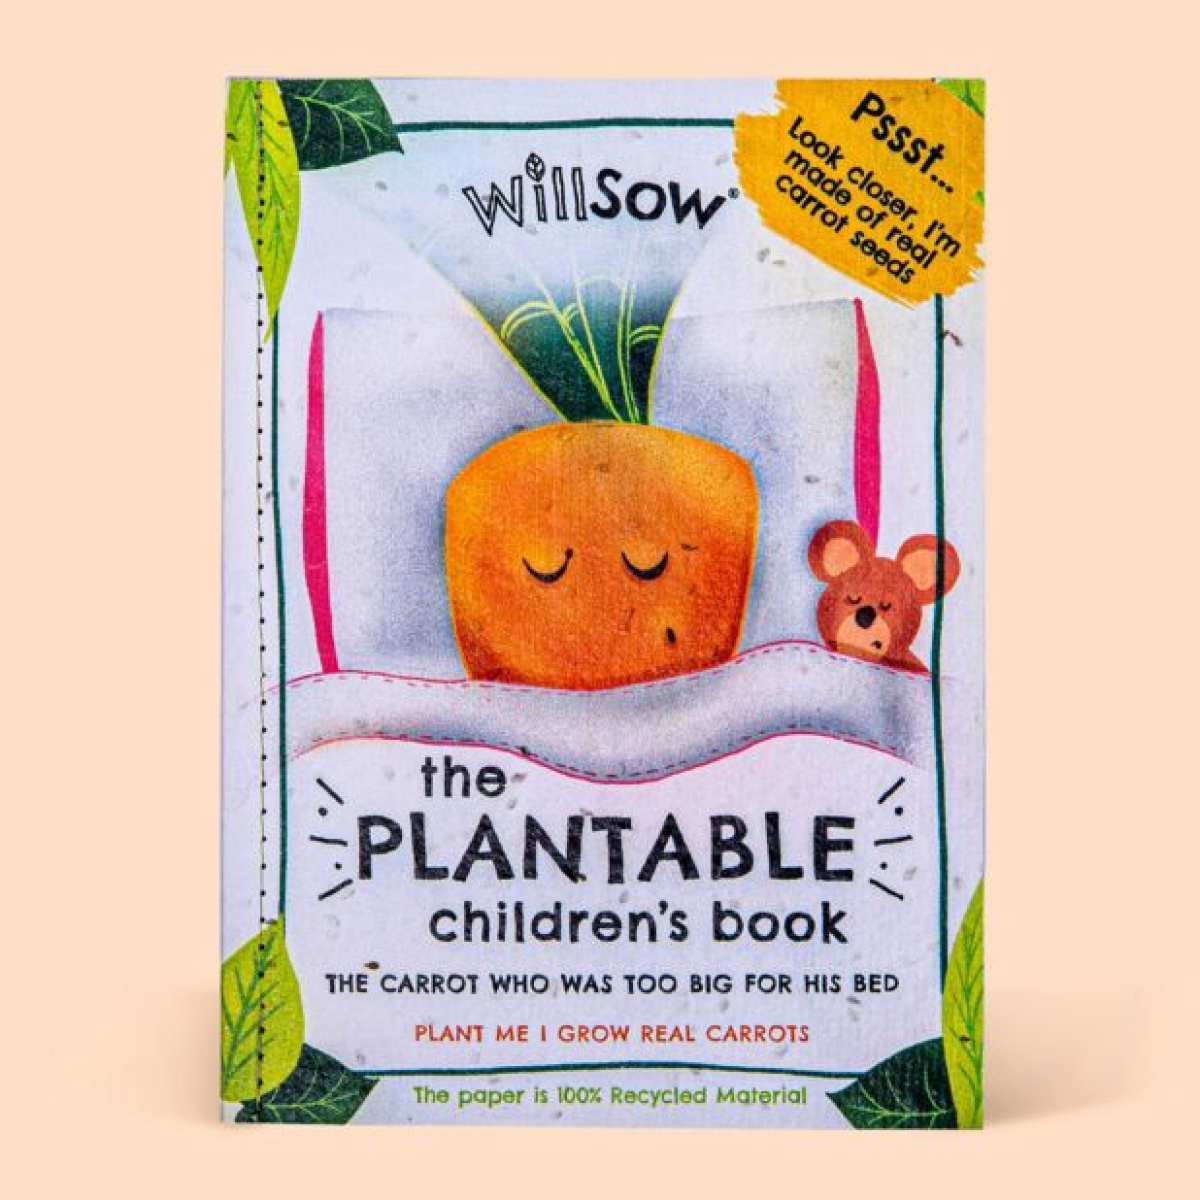 ‘The Carrot Who Was Too Big For His Bed’ Plantable Children’s Book